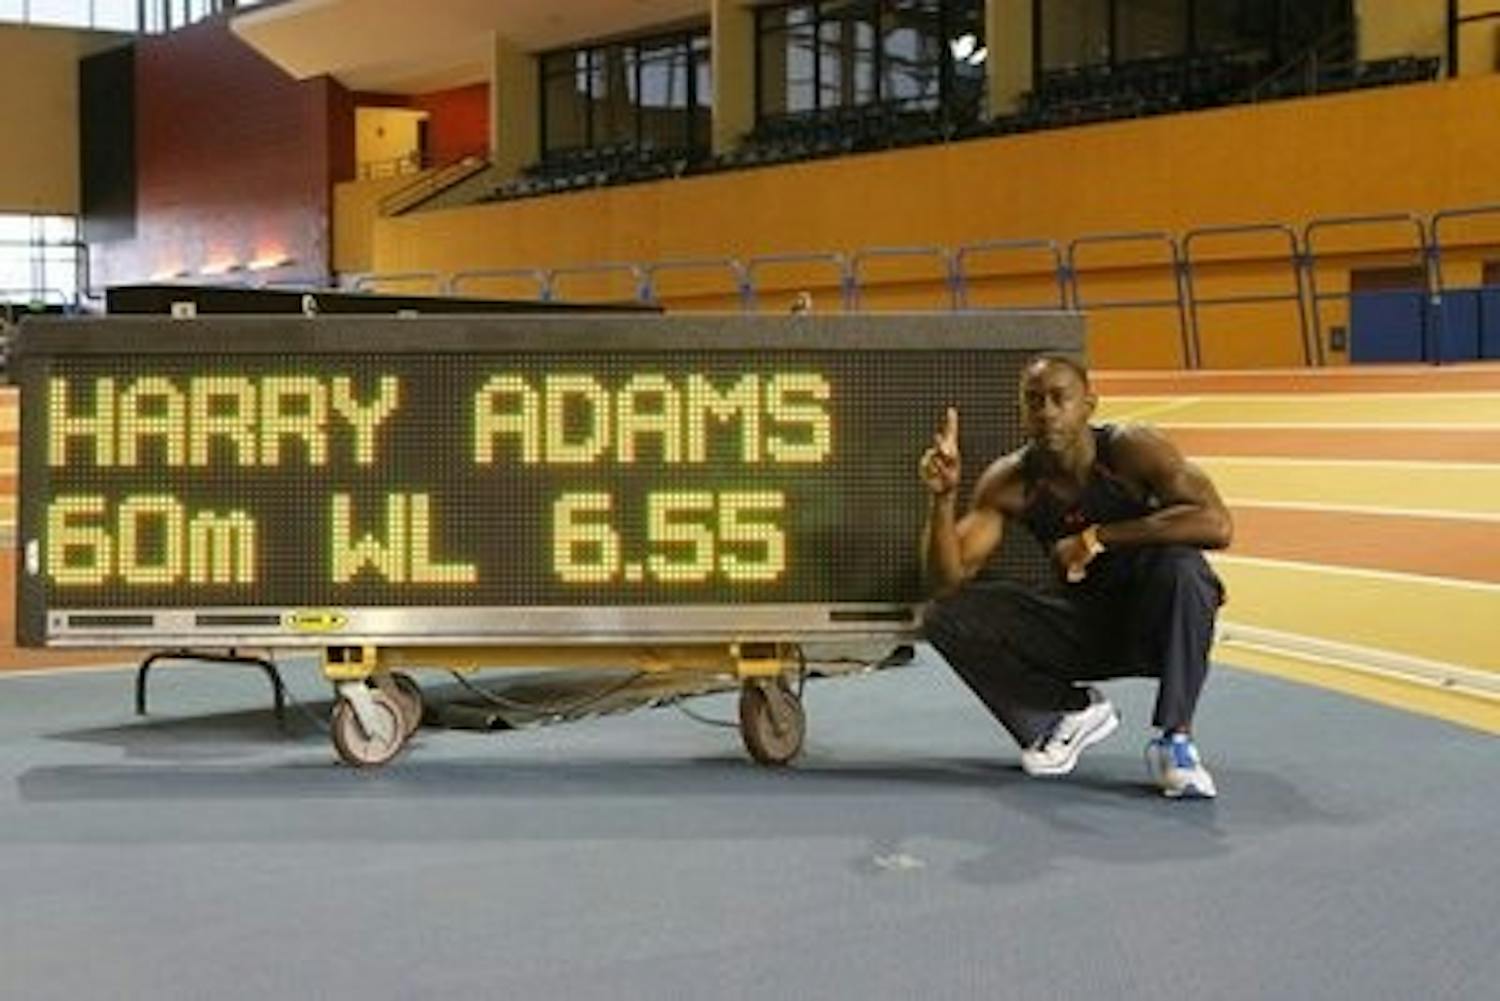 Adams poses beside the scoreboard of his world record run. (CONTRIBUTED)